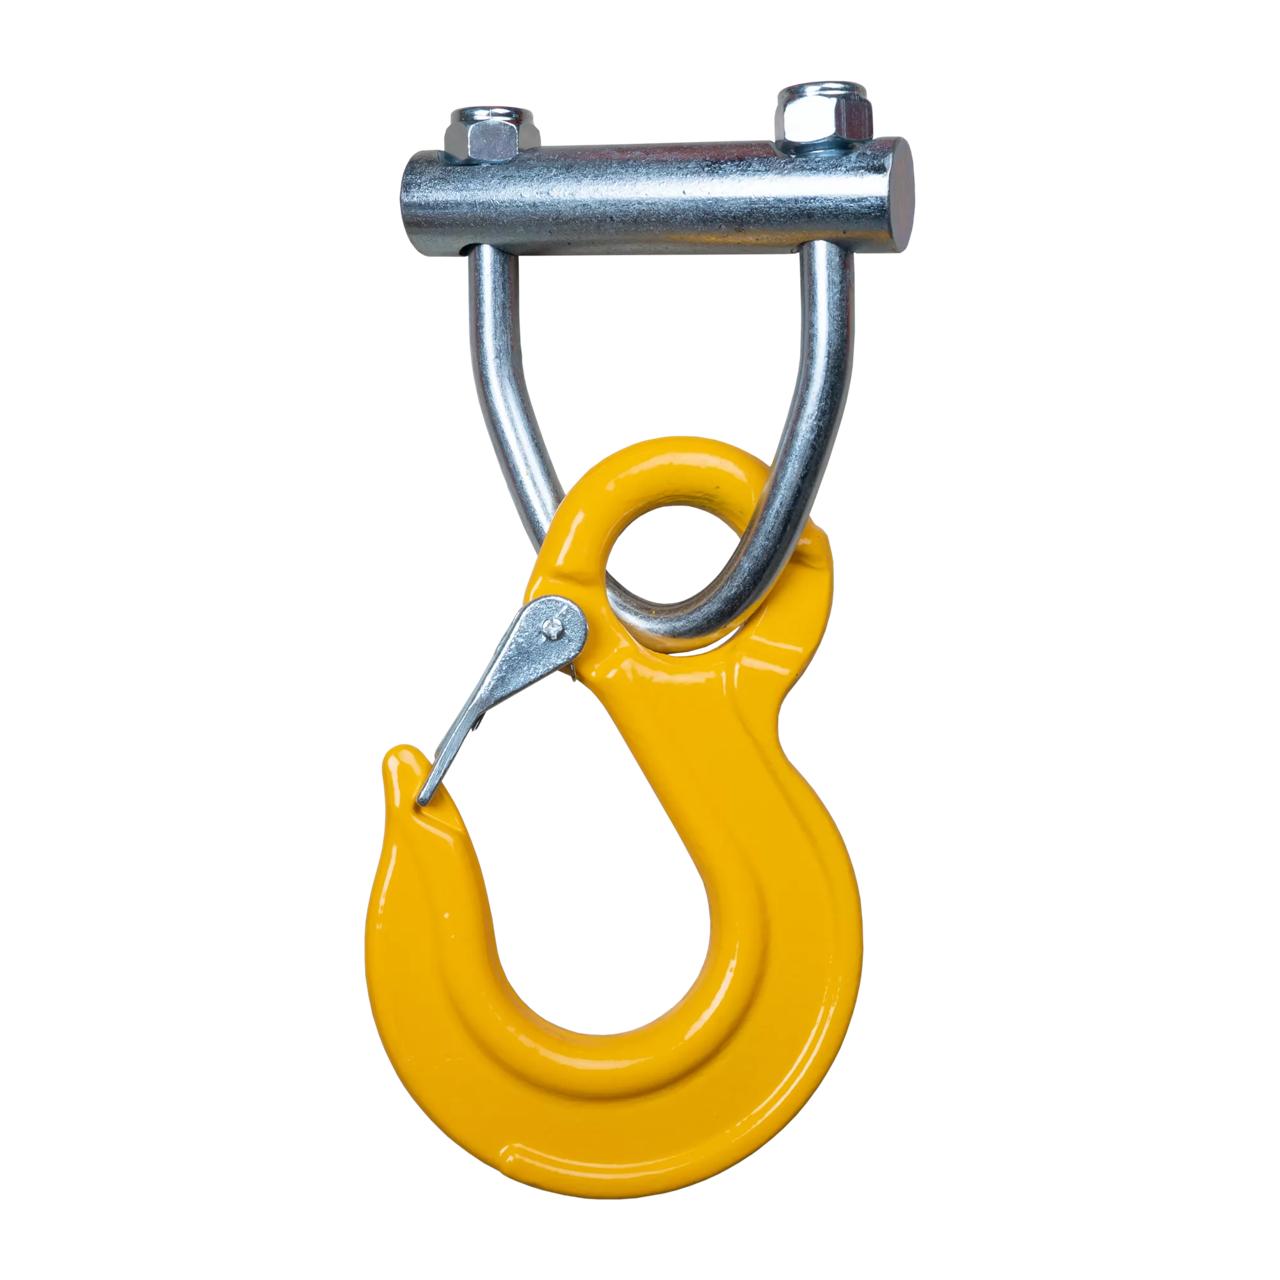 Lifting hook with latch 13-8, MBL20T